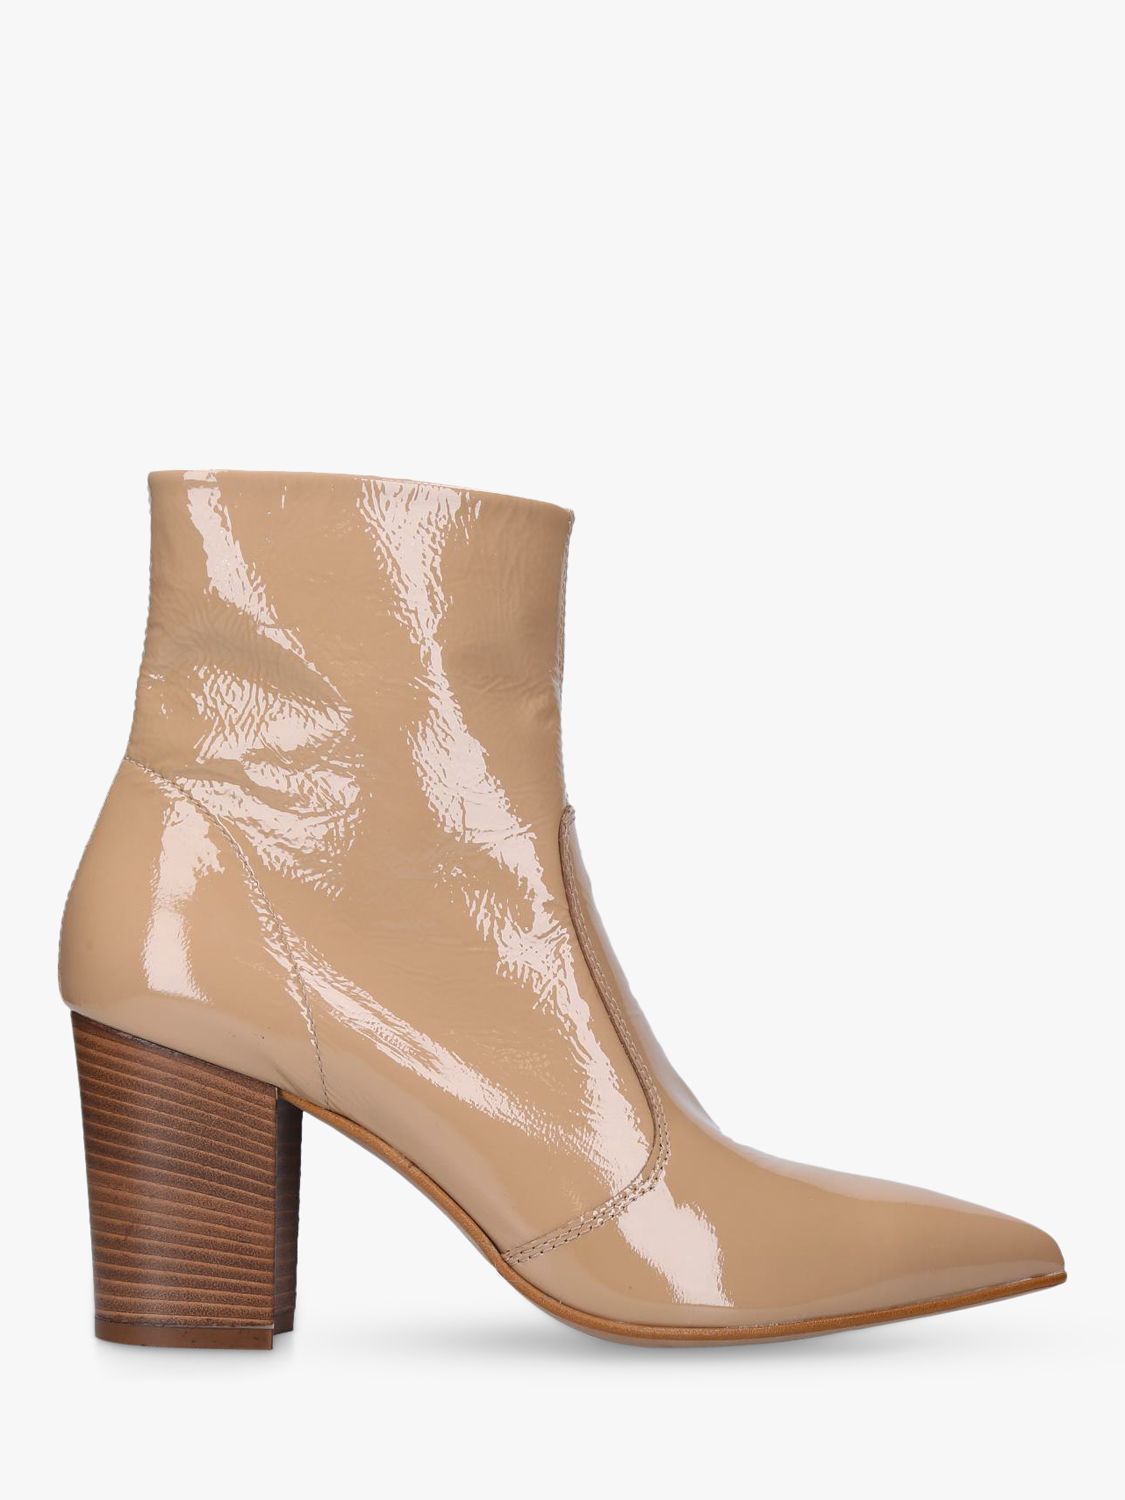 Carvela Sculpture Leather Pointed Toe Ankle Boots